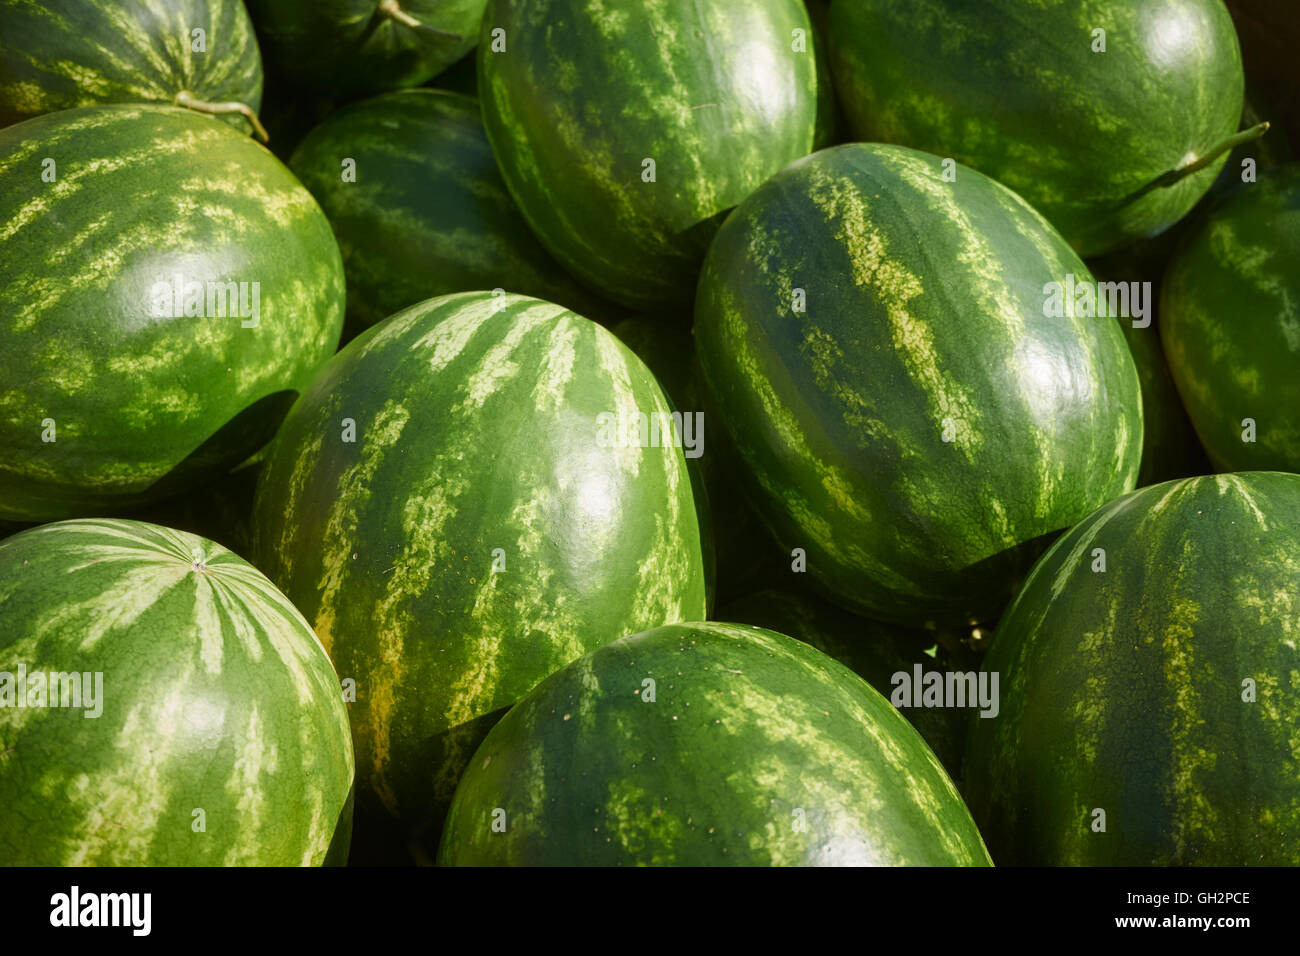 watermelons being displayed at the Leola Produce Auction in Amish Country, Lancaster, Pennsylvania, USA Stock Photo